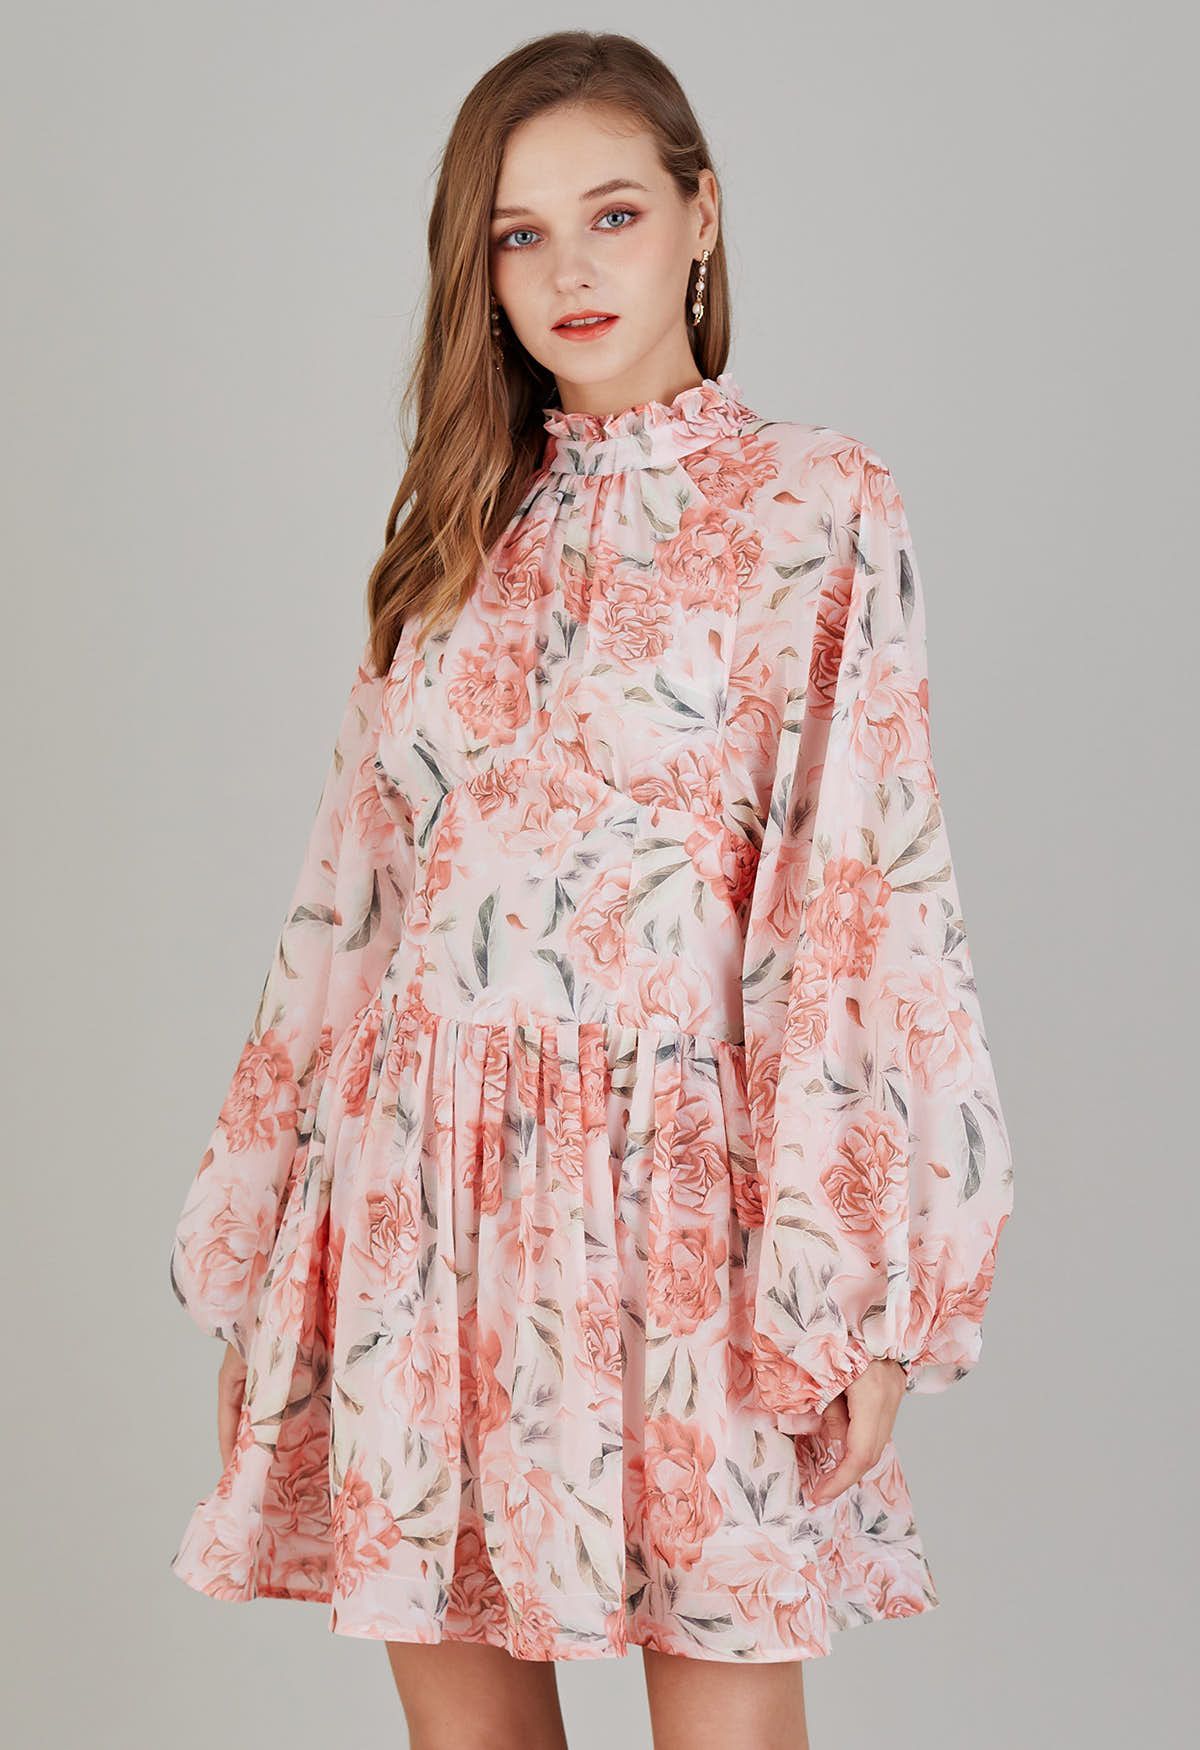 Cutout Back Floral Bubble Sleeve Frilling Dress in Blush | Chicwish